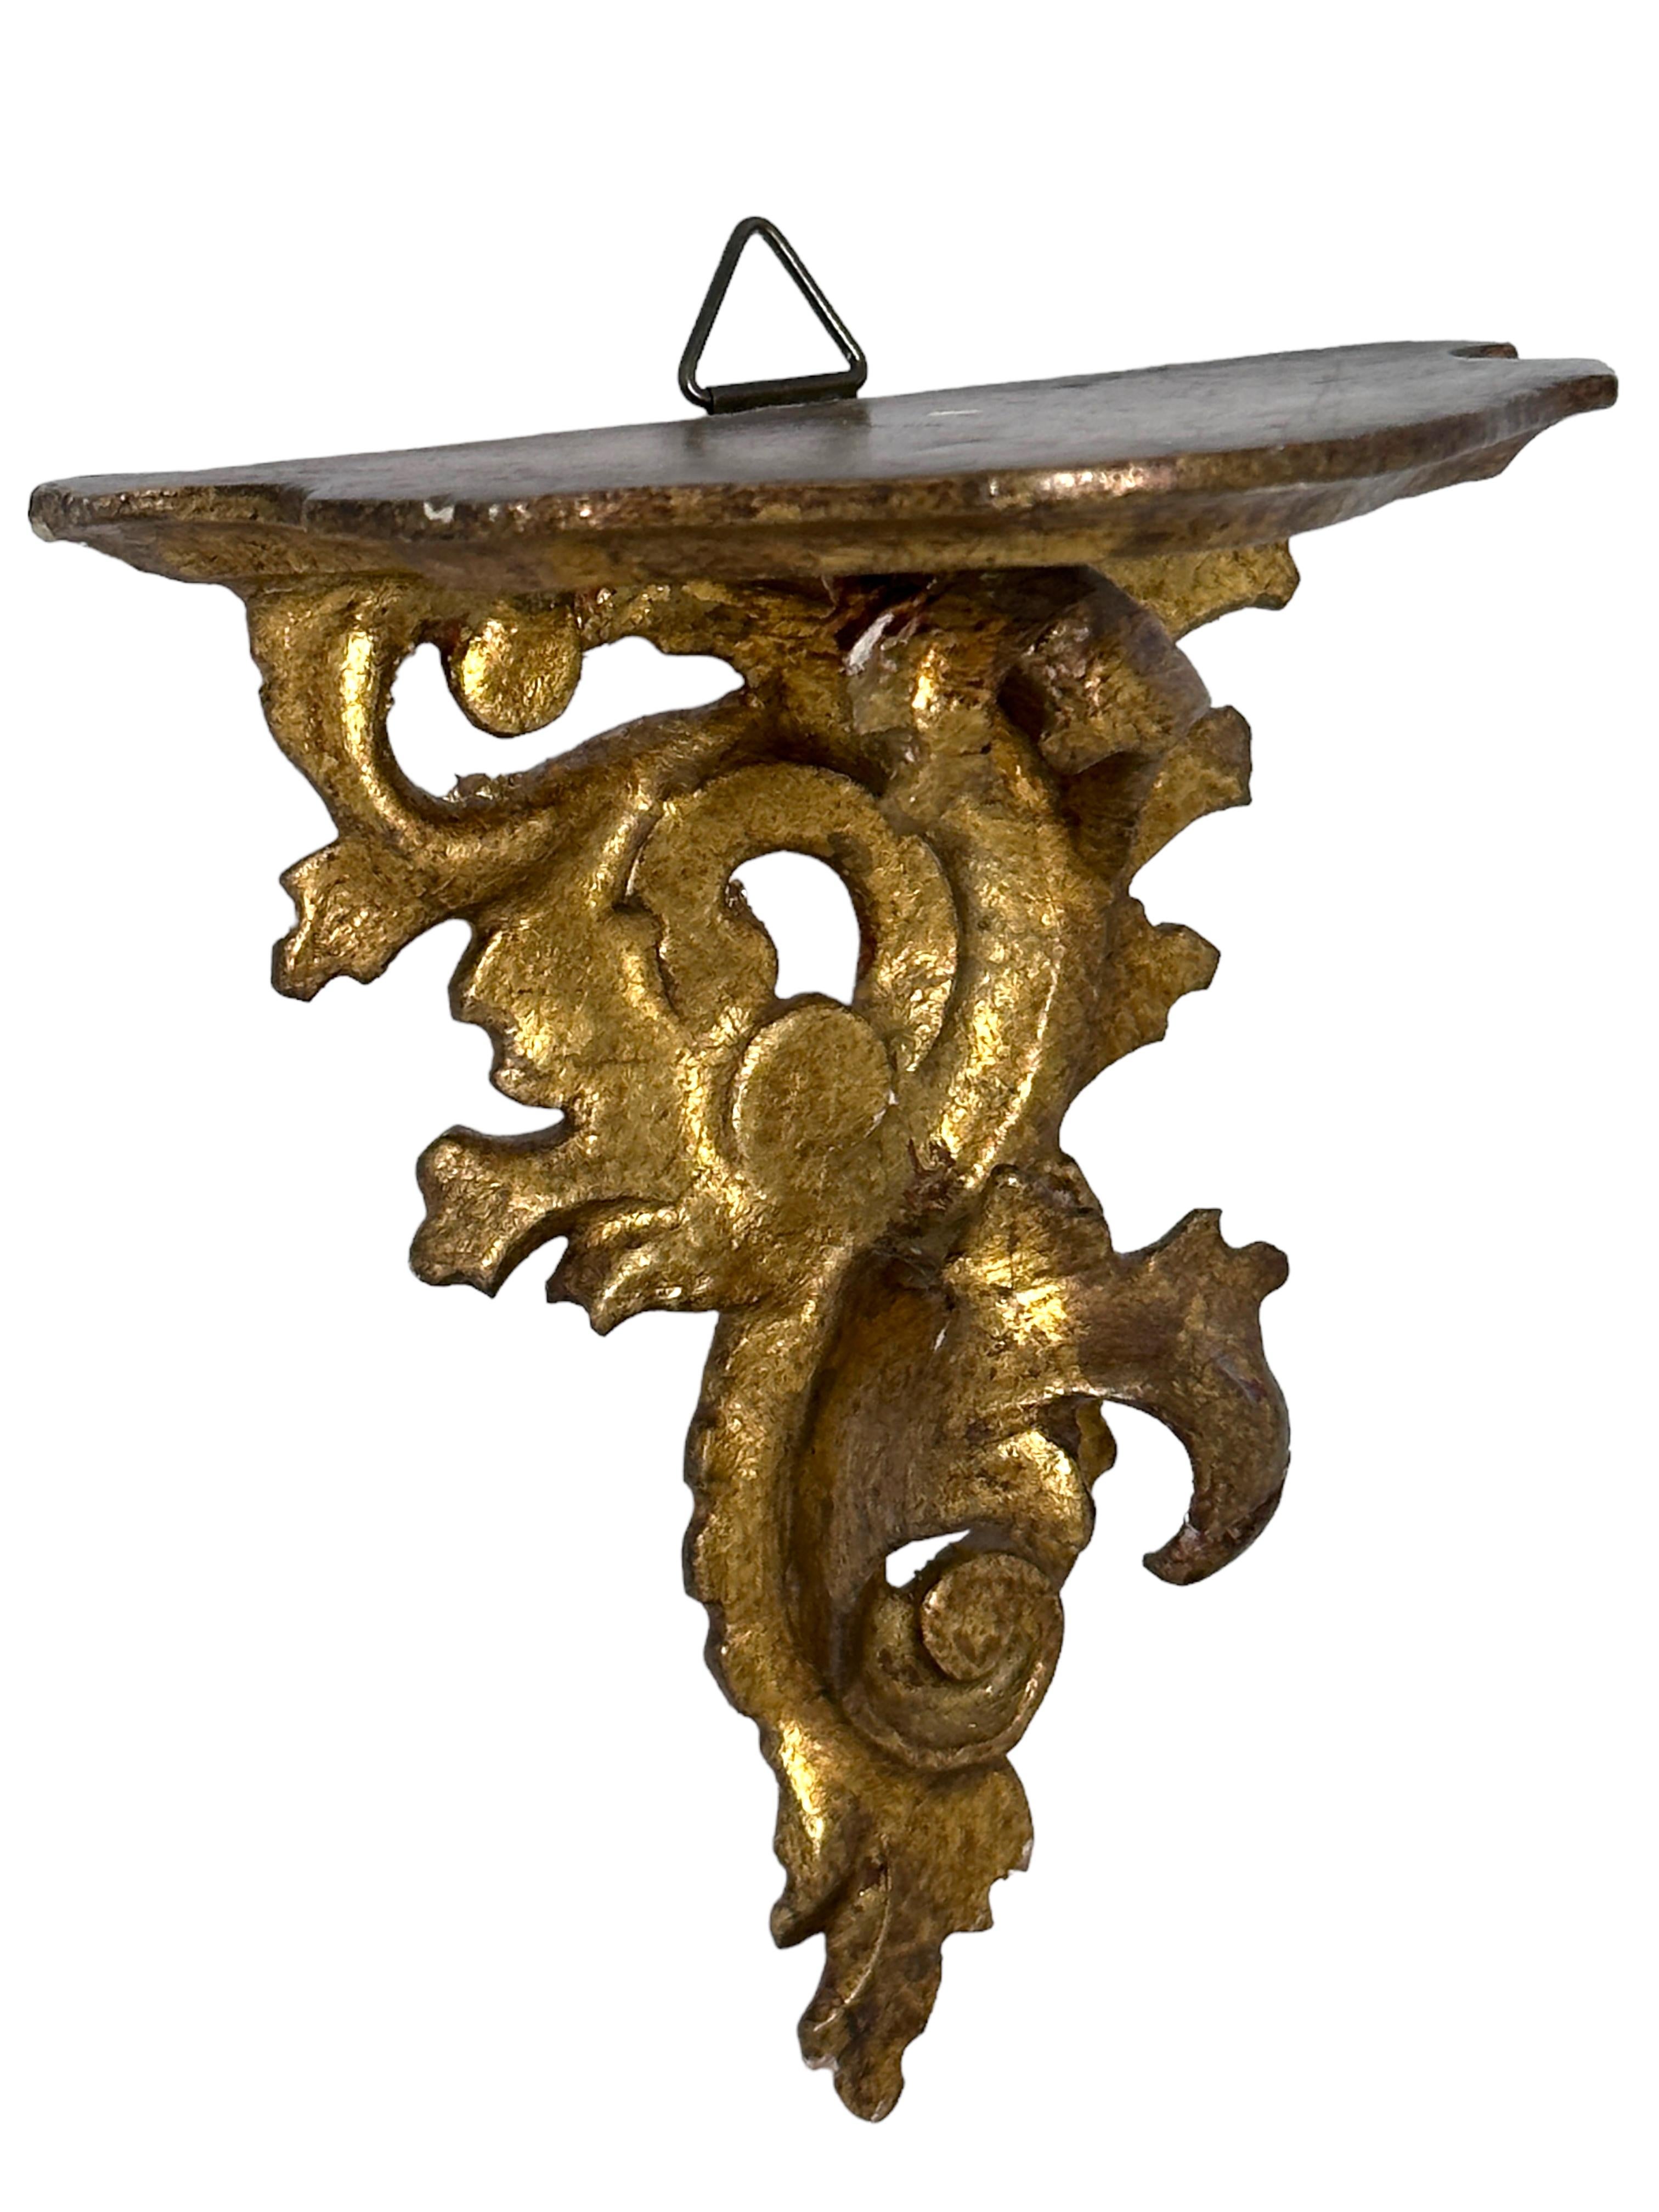 Offered is an absolutely stunning, 1950s Italian gilt wood miniature wall shelf or wall console. Minor patina and paint lost gives this piece a classy statement. Made of hand carved wood and gold plated. A nice shelf to present a statuette or a